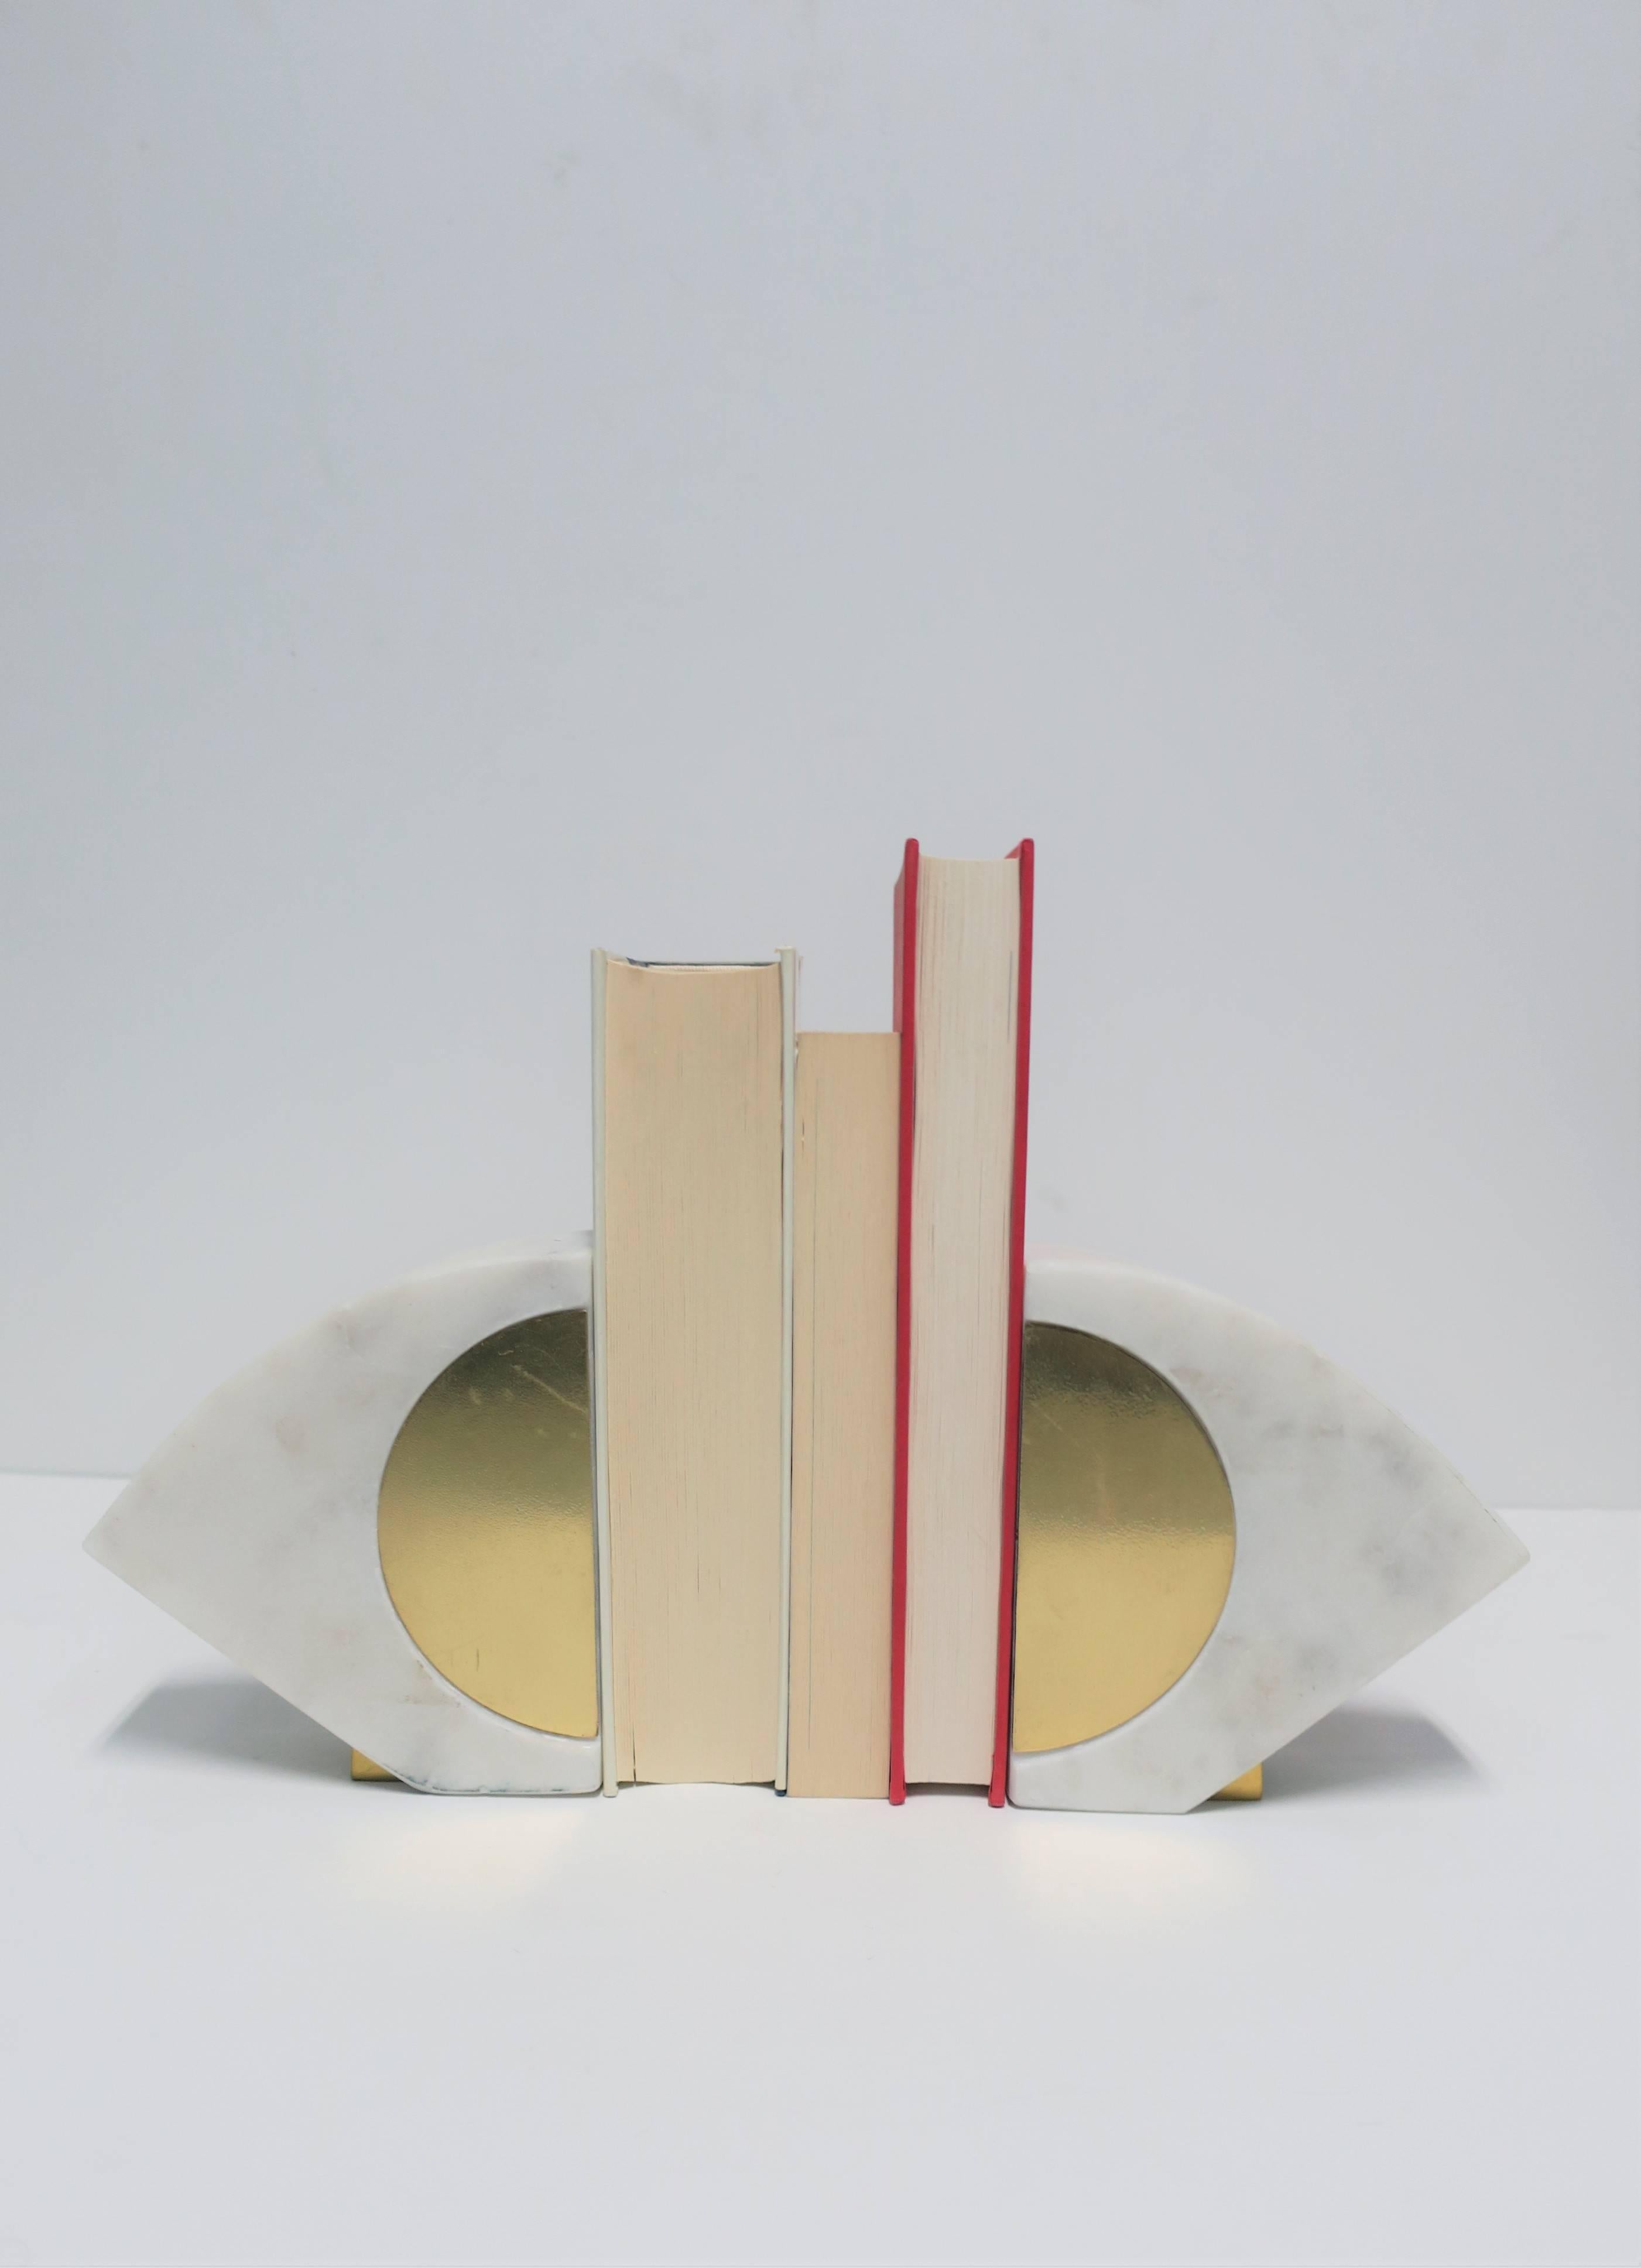 Plated White and Gold Marble Bookends or Decorative Object Sculpture